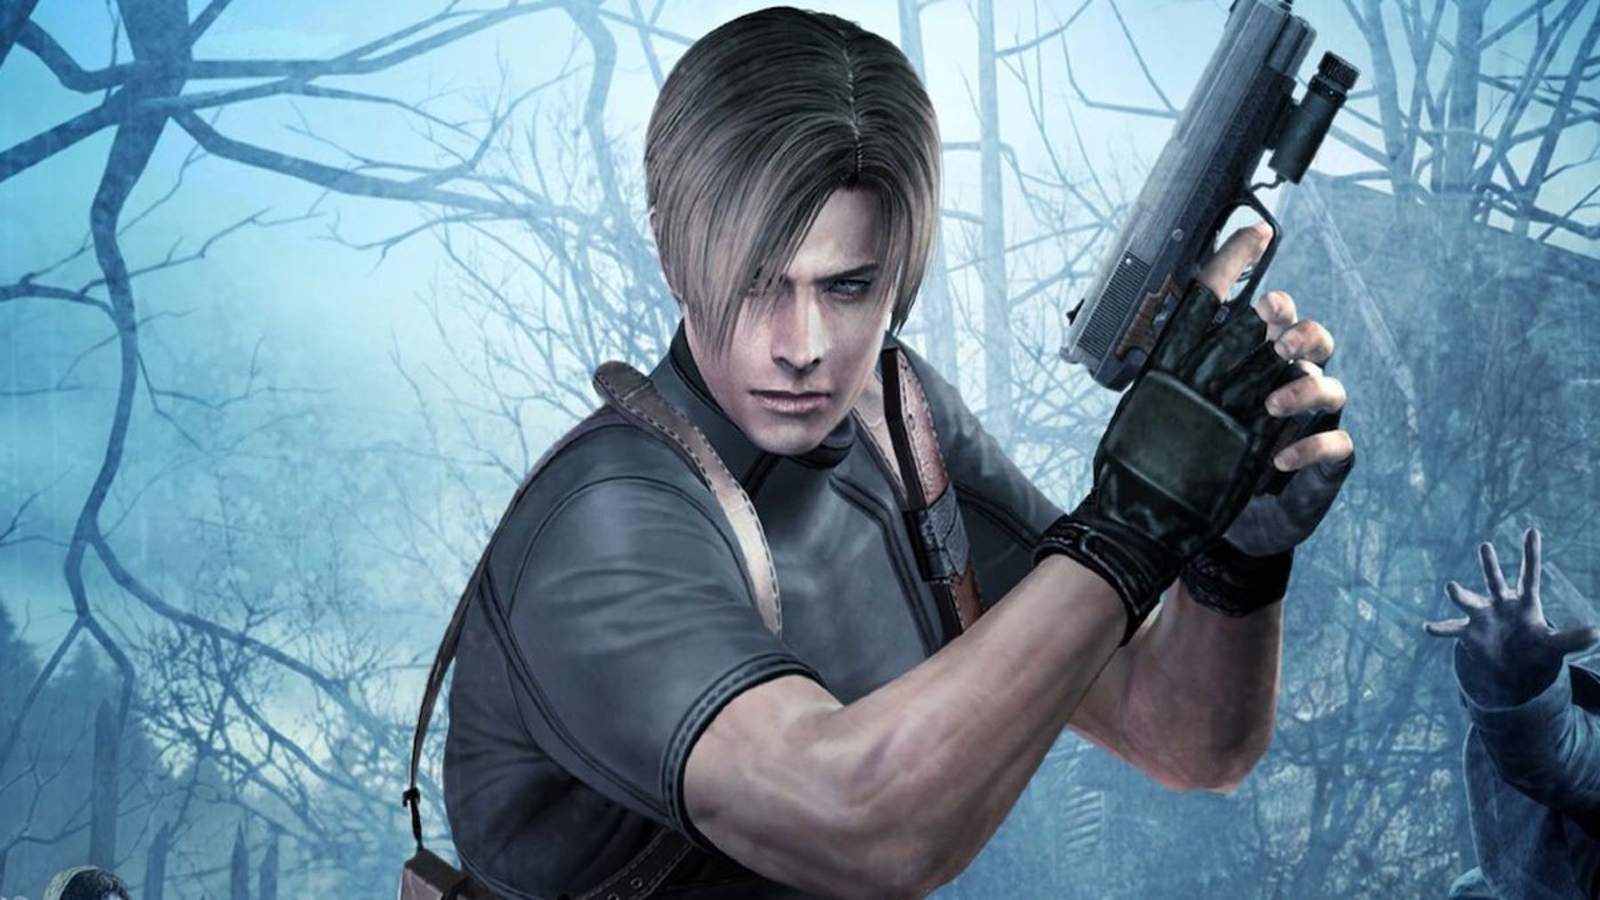 Resident Evil 4 Remake Release Date Announced at Sony's State of Play Event